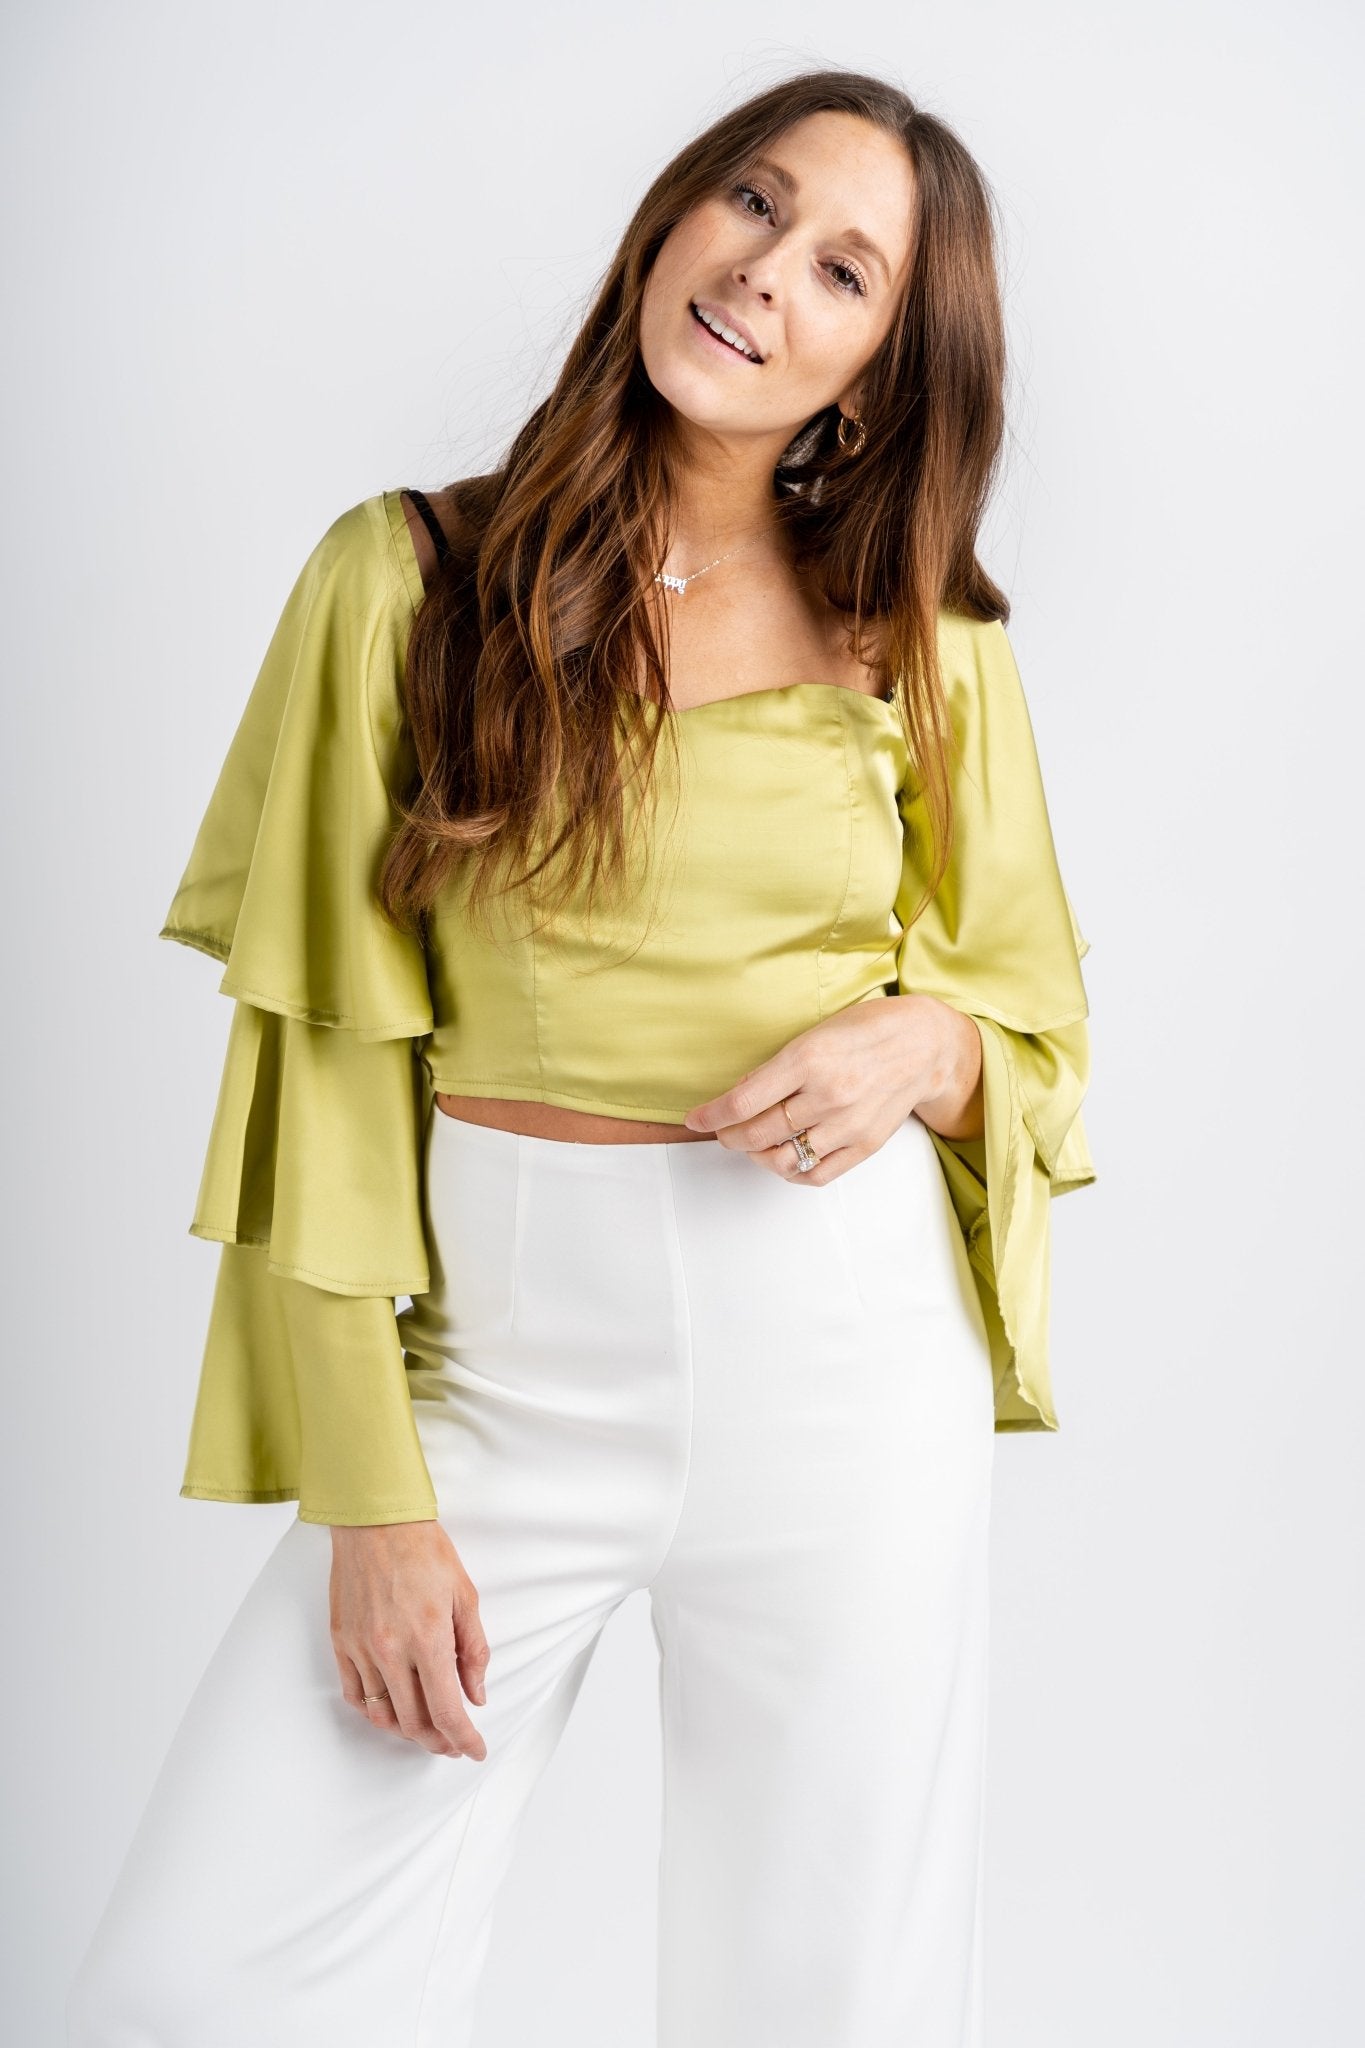 Trumpet sleeve crop top muted lime - Adorable Top - Stylish Vacation T-Shirts at Lush Fashion Lounge Boutique in Oklahoma City